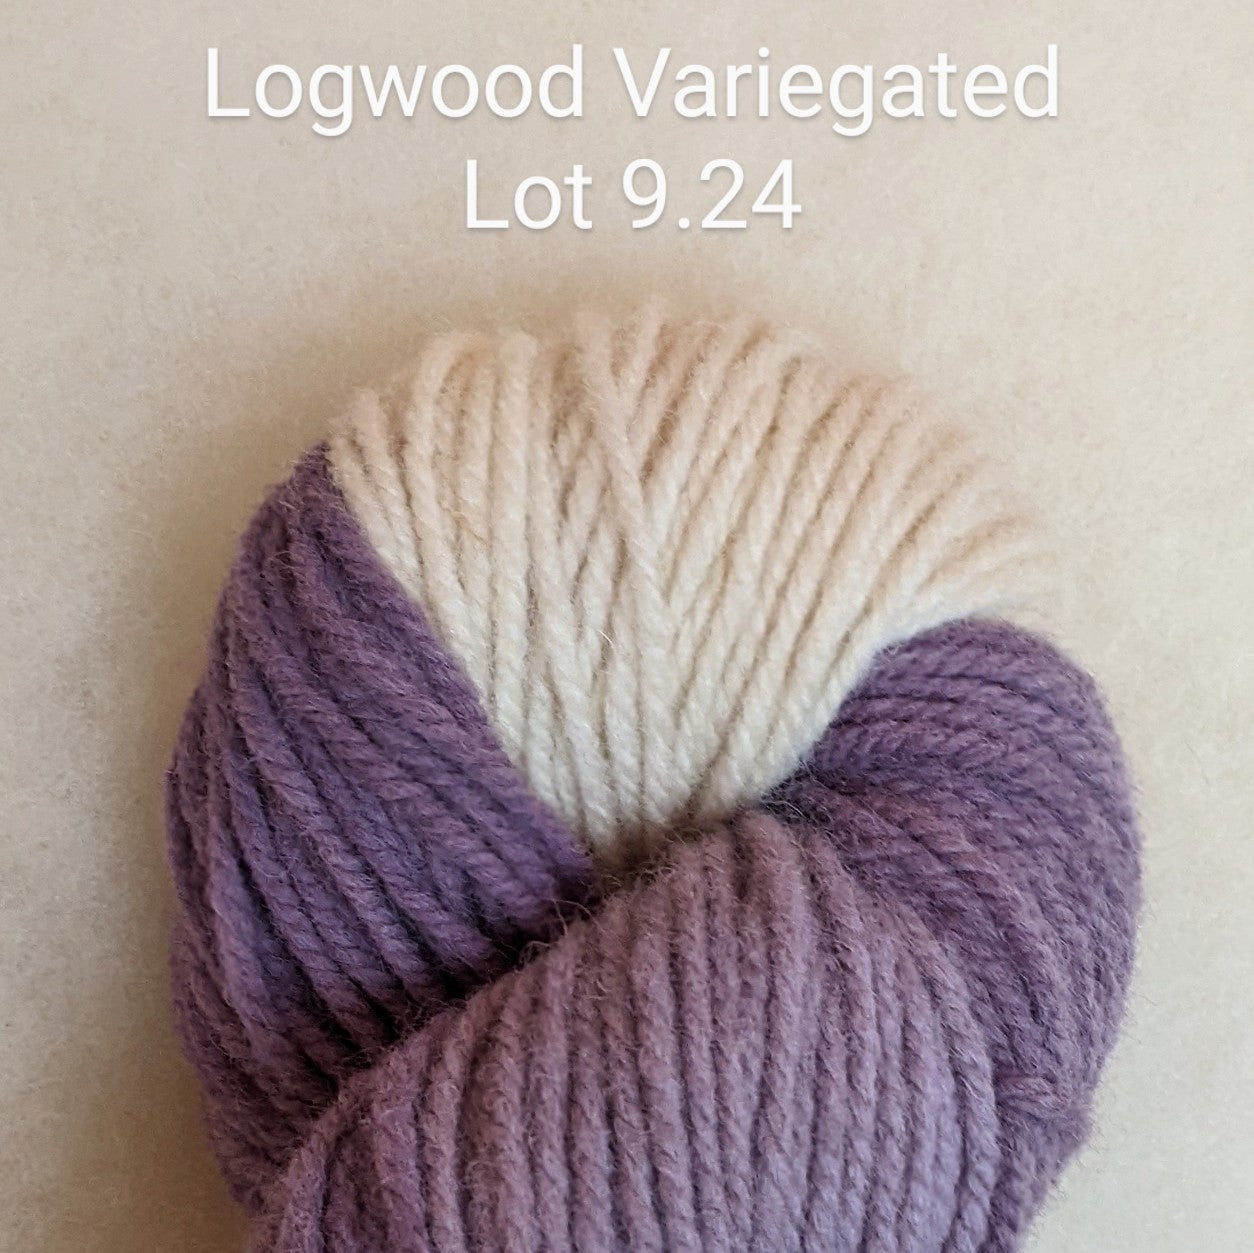 Yarn - "Harvest" 3ply Worsted